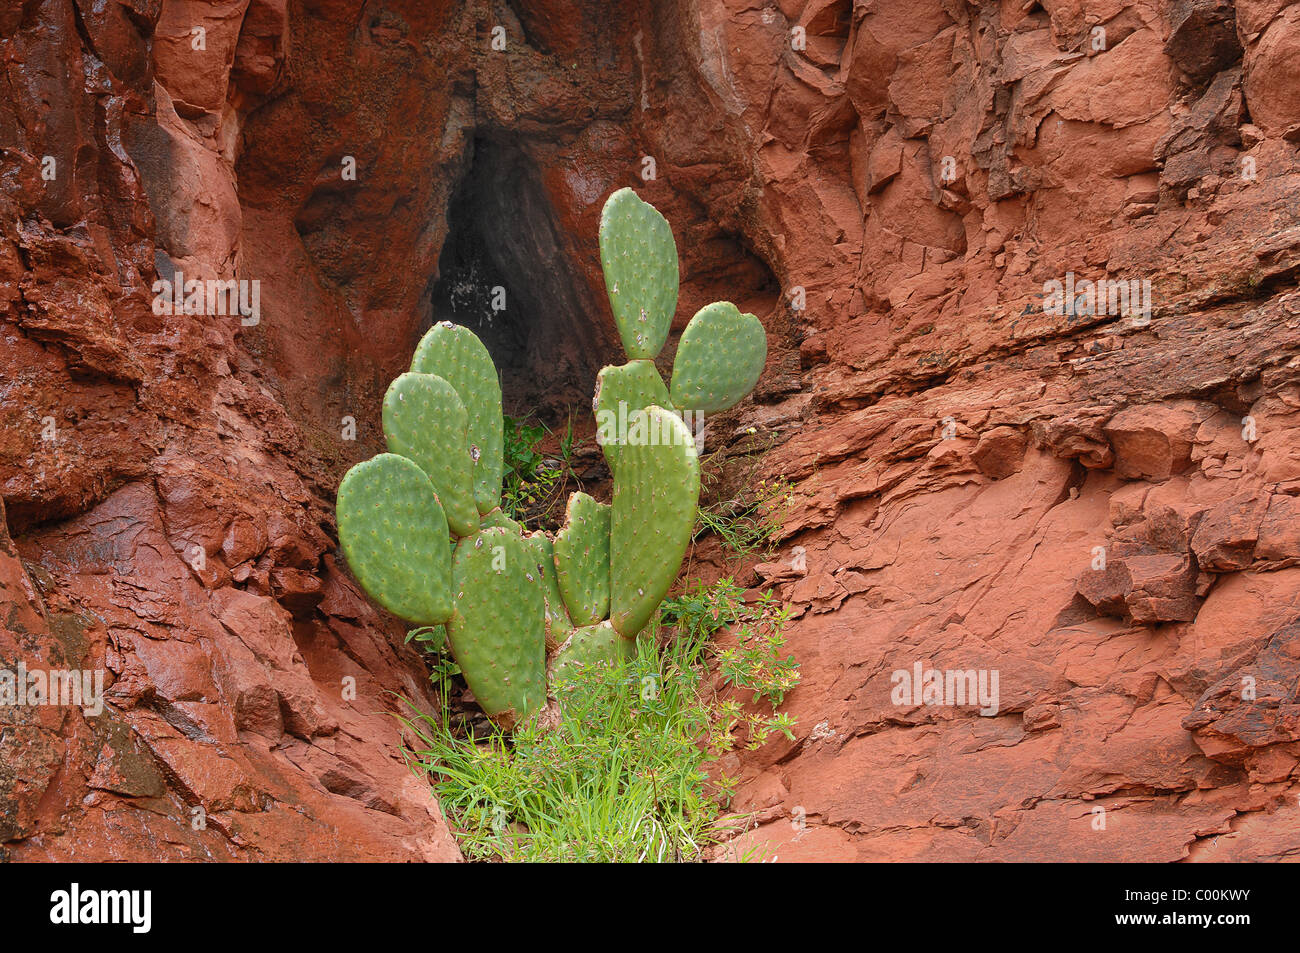 Like all wild plants in Arizona, the prickly pear cactus is protected by law. Stock Photo